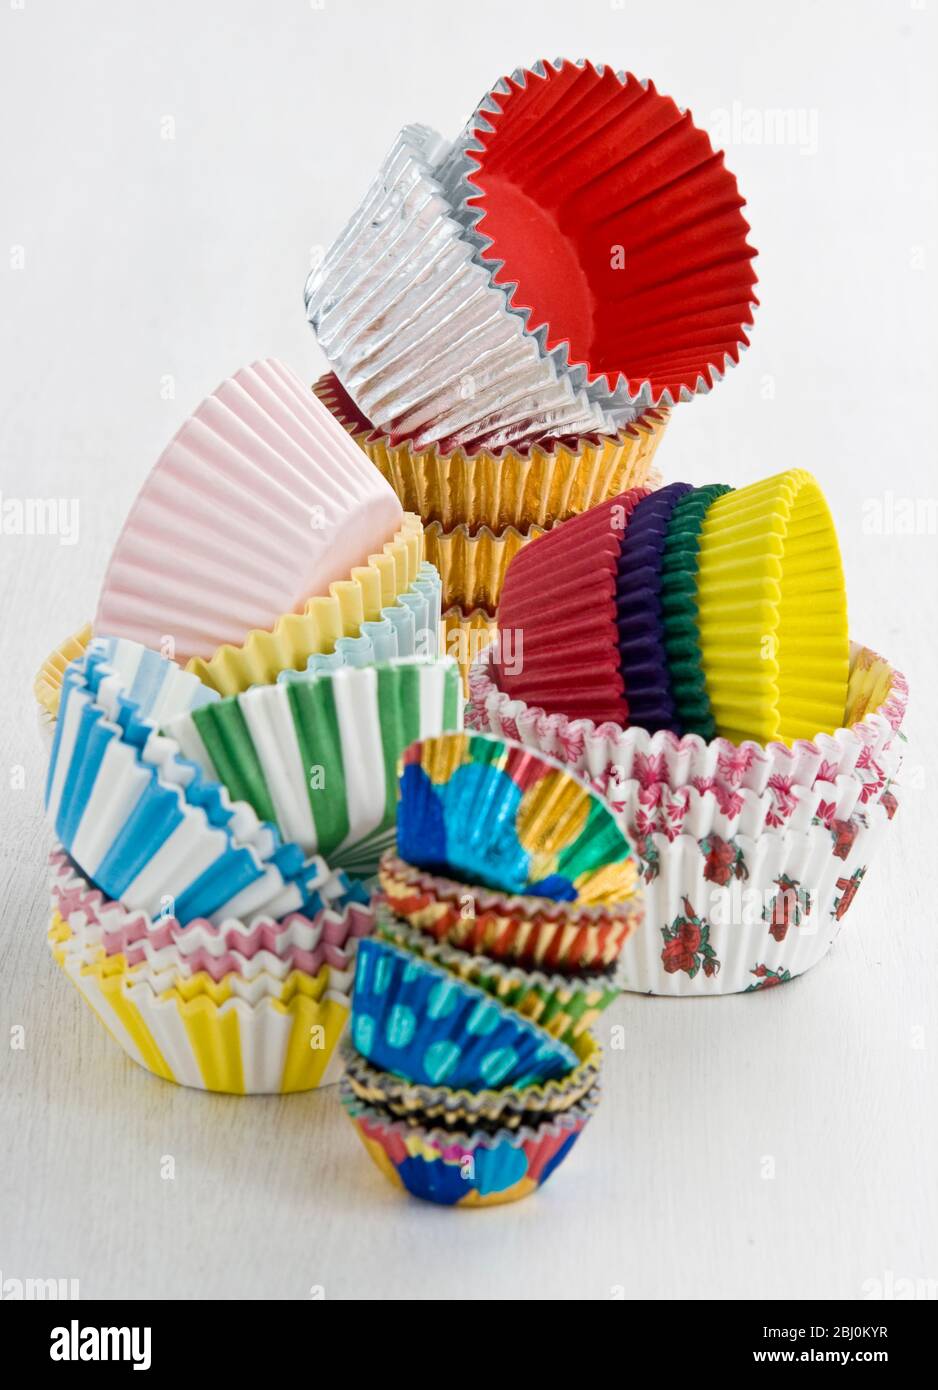 Stacks of decorative paper and foil cake and muffin cases - Stock Photo